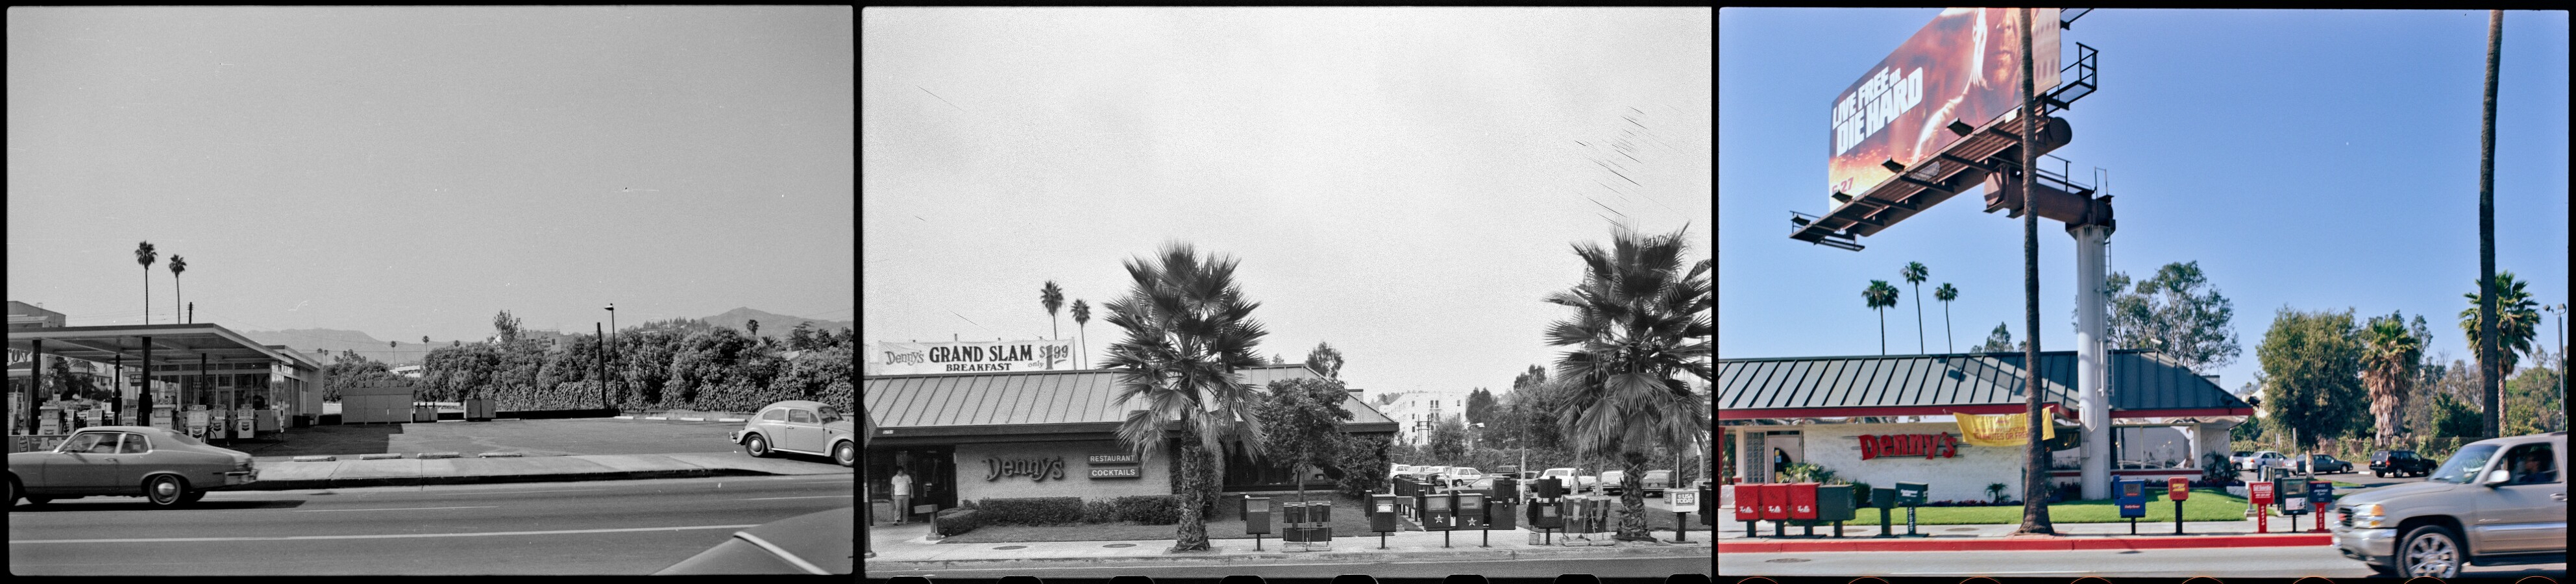 three images stitched together showing the changes along a section of Sunset Boulevard